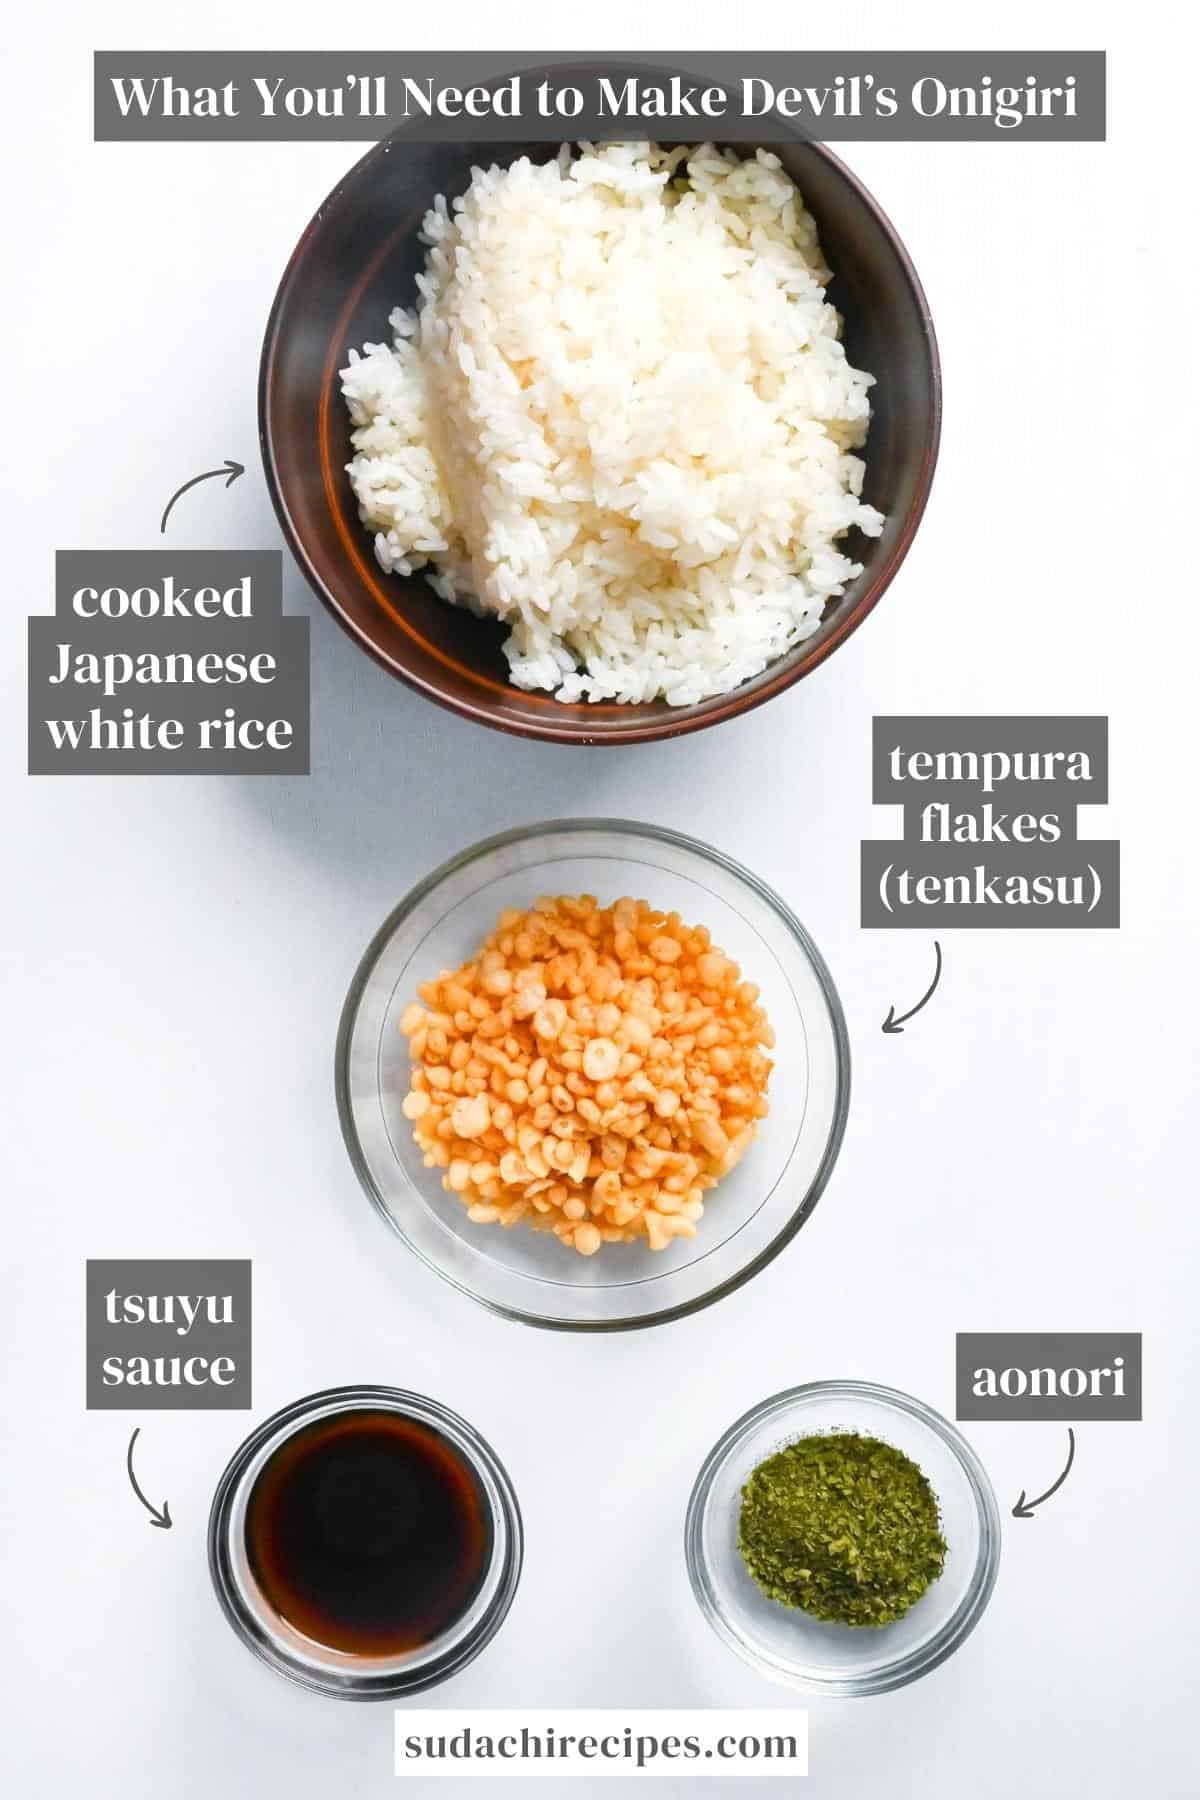 devil's onigiri ingredients on a white background with labels